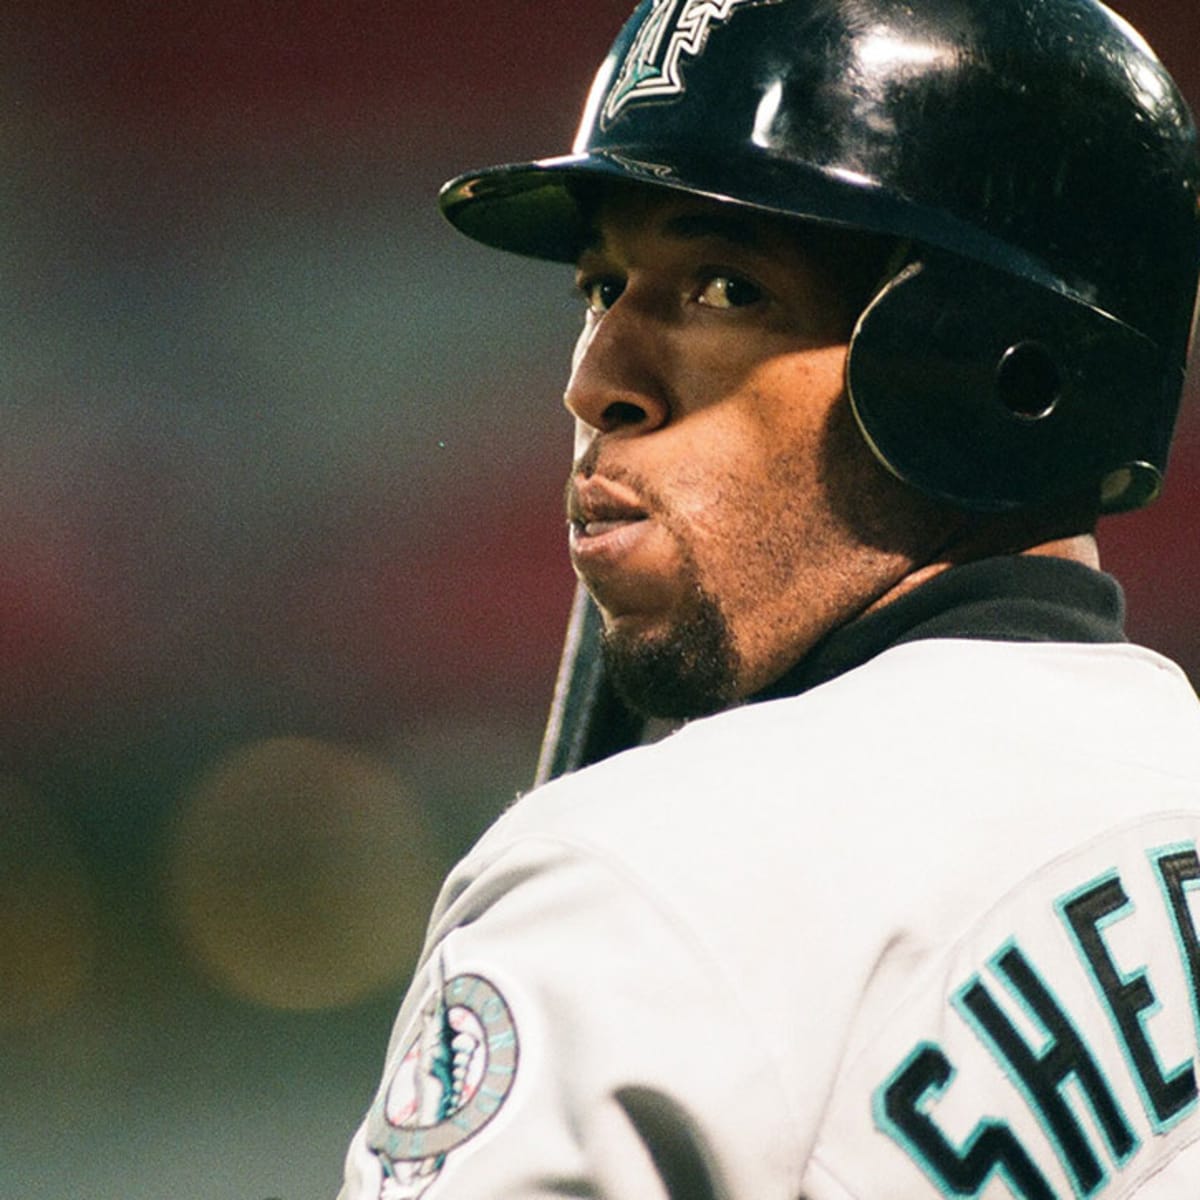 Gary Sheffield completing the sweep of the Baltimore Orioles in